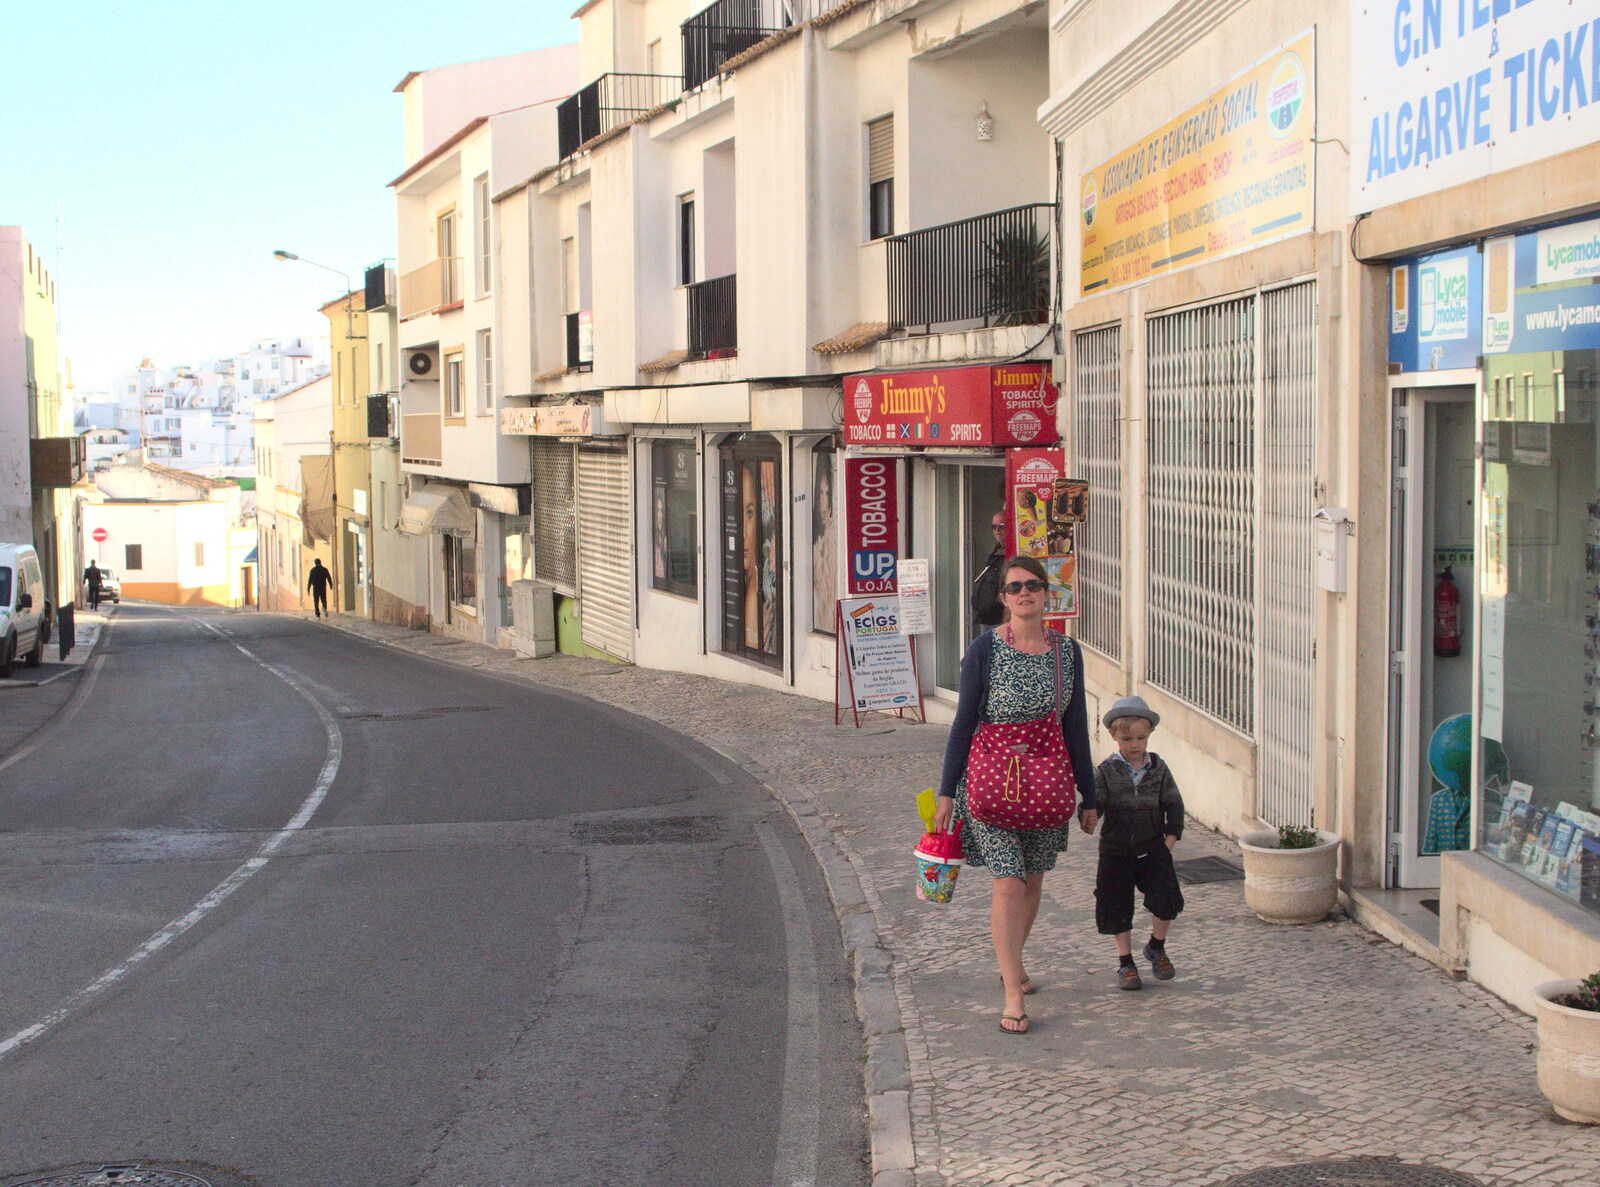 Isobel and Harry on the street from Last Days and the Journey Home, Albufeira, Portugal - 9th April 2016